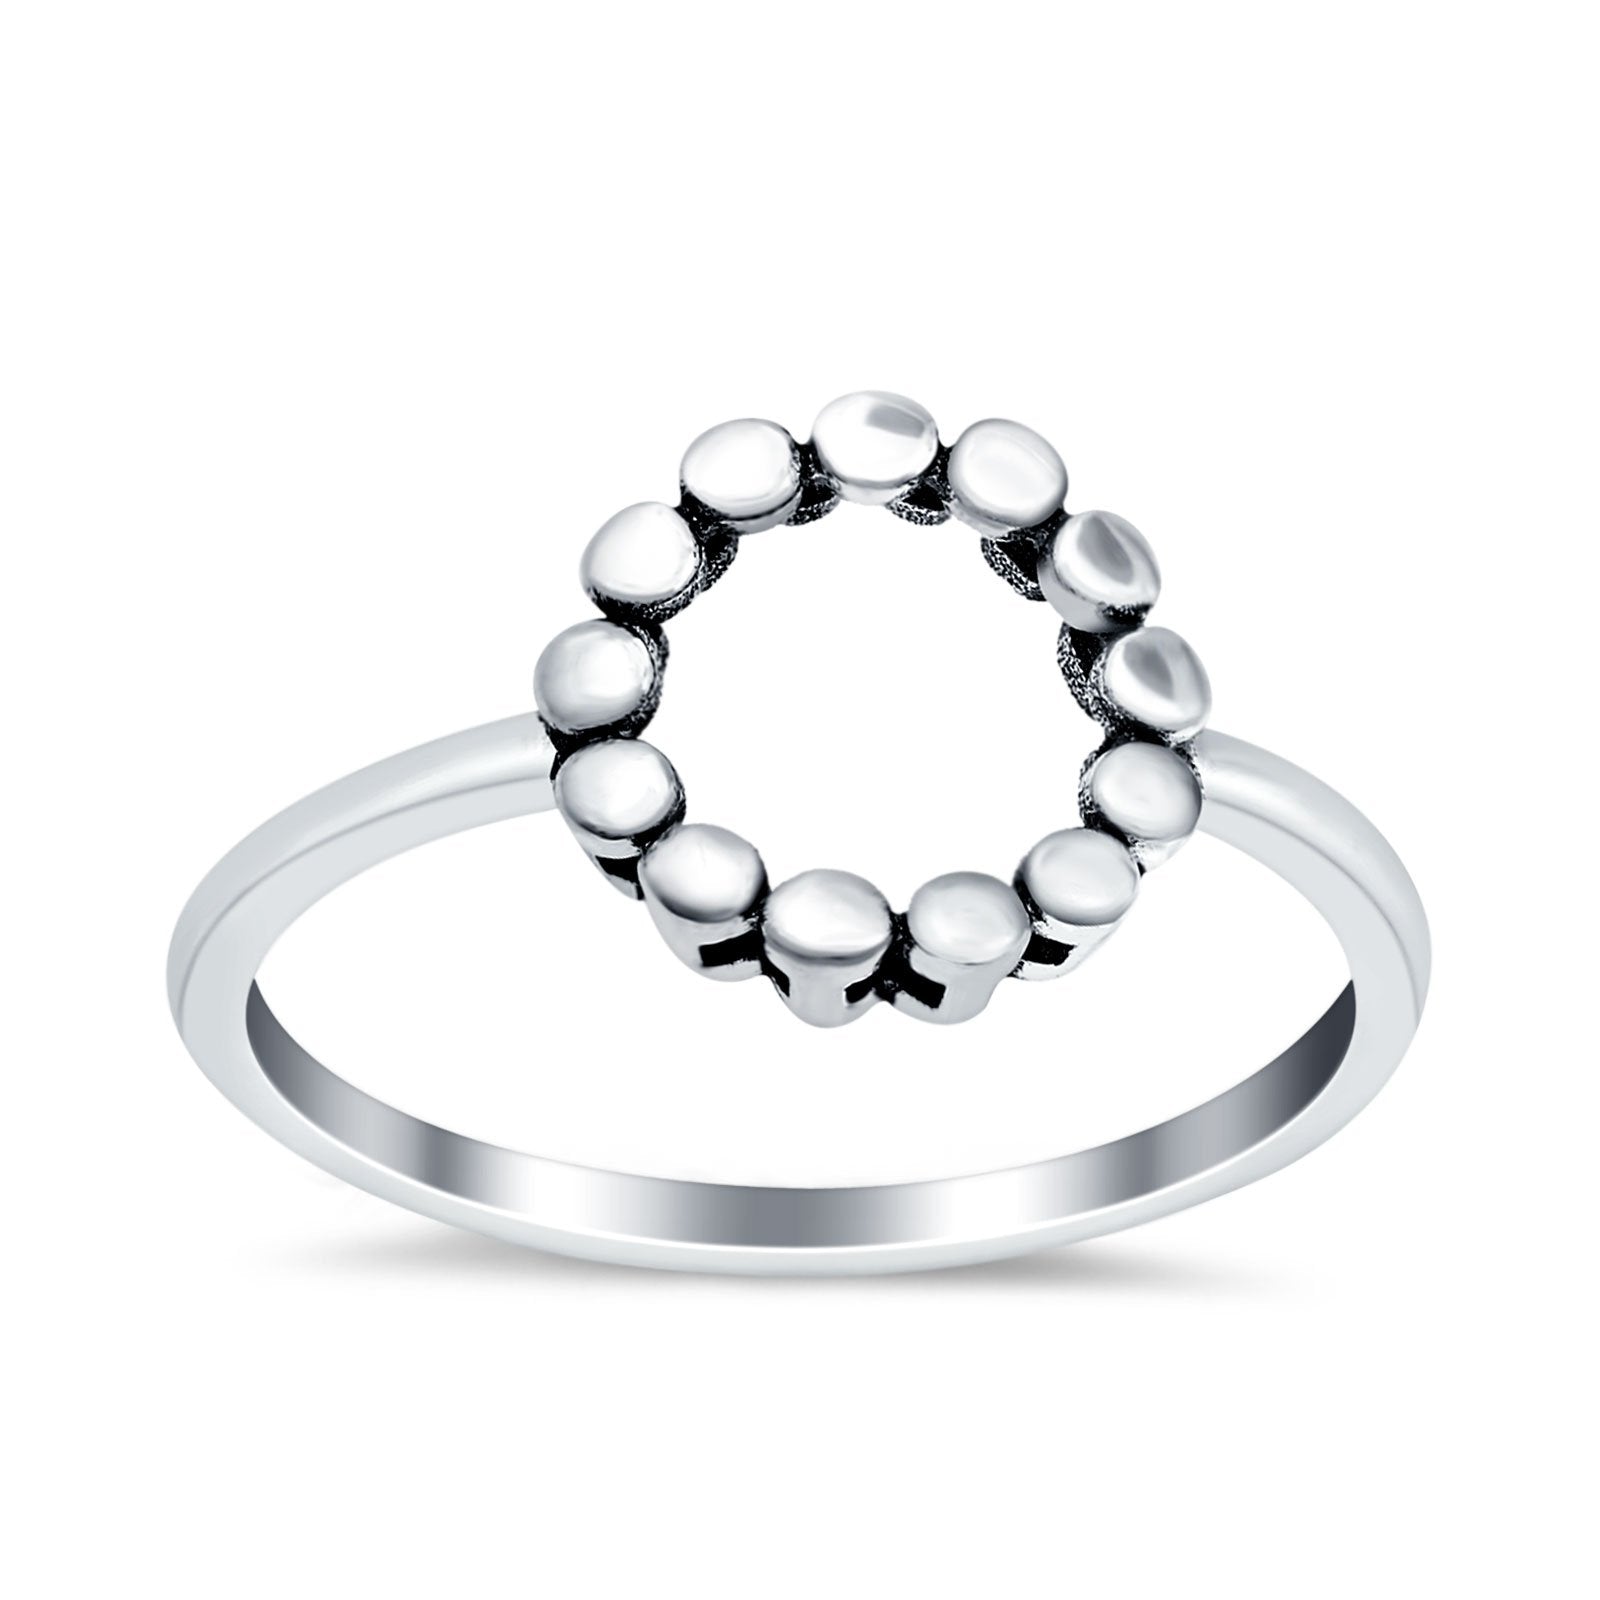 O Open Plain Ring Oxidized Band 925 Sterling Silver